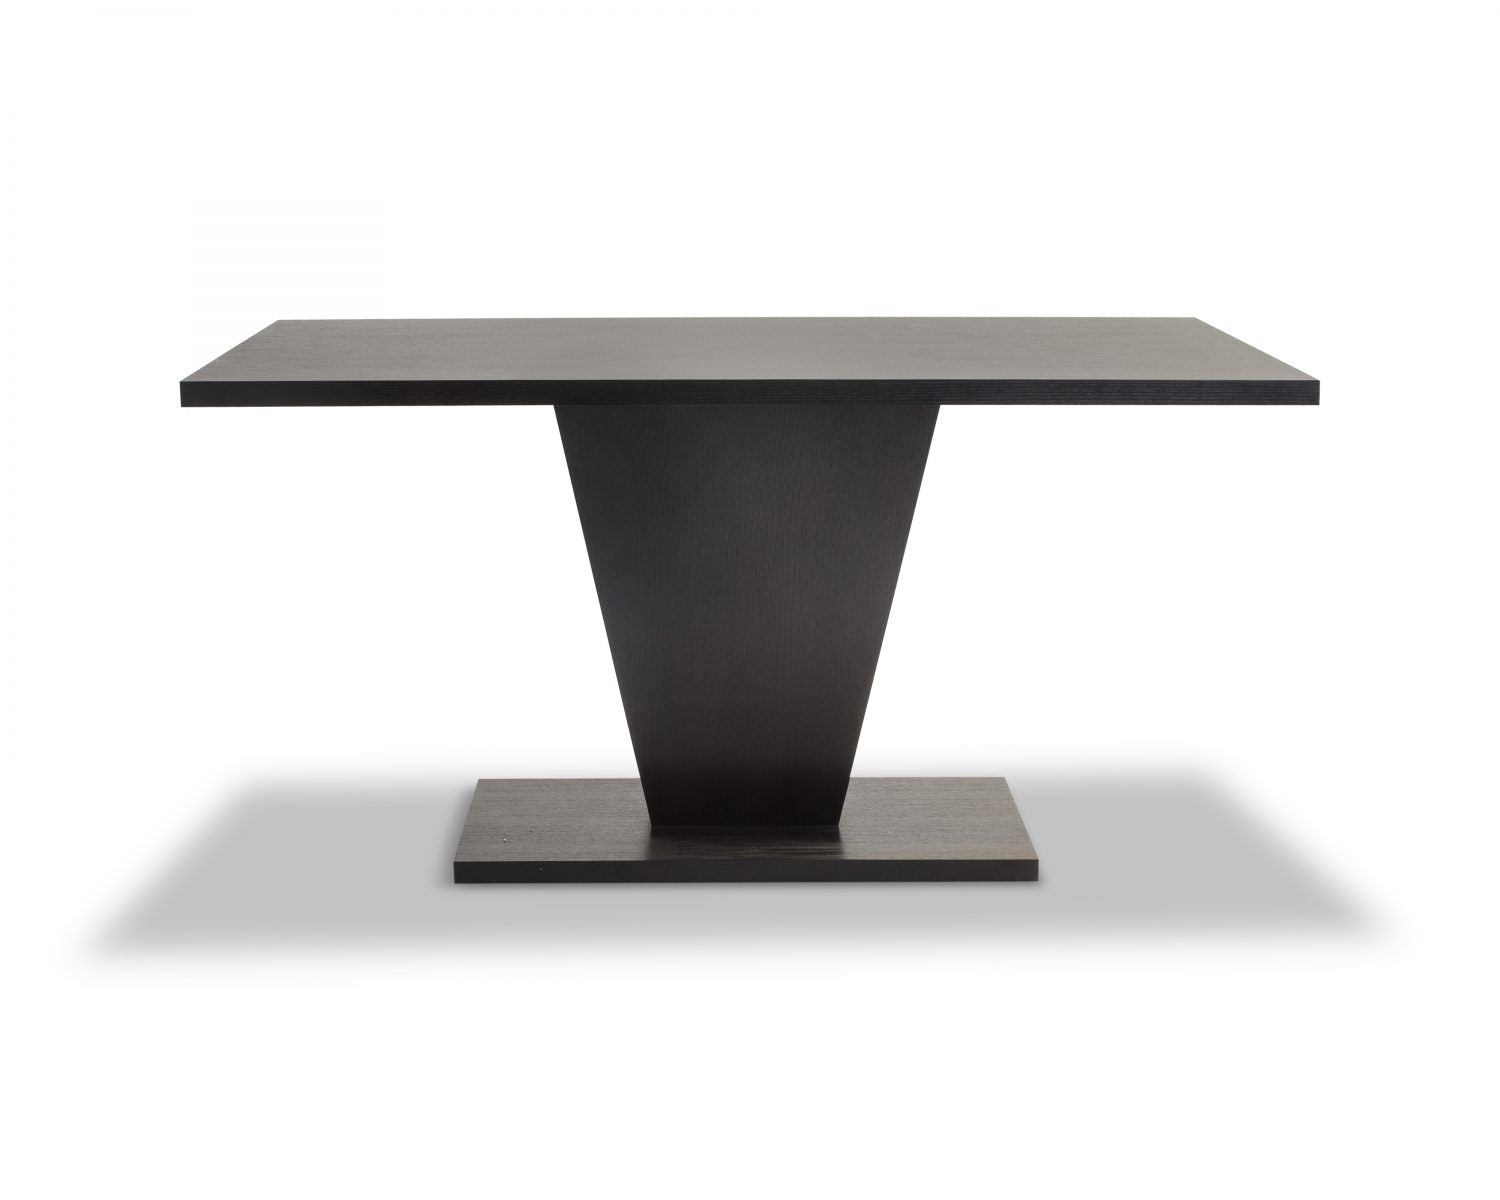  LiangAndEimil-Liang & Eimil Dorset Dining Table- 45 